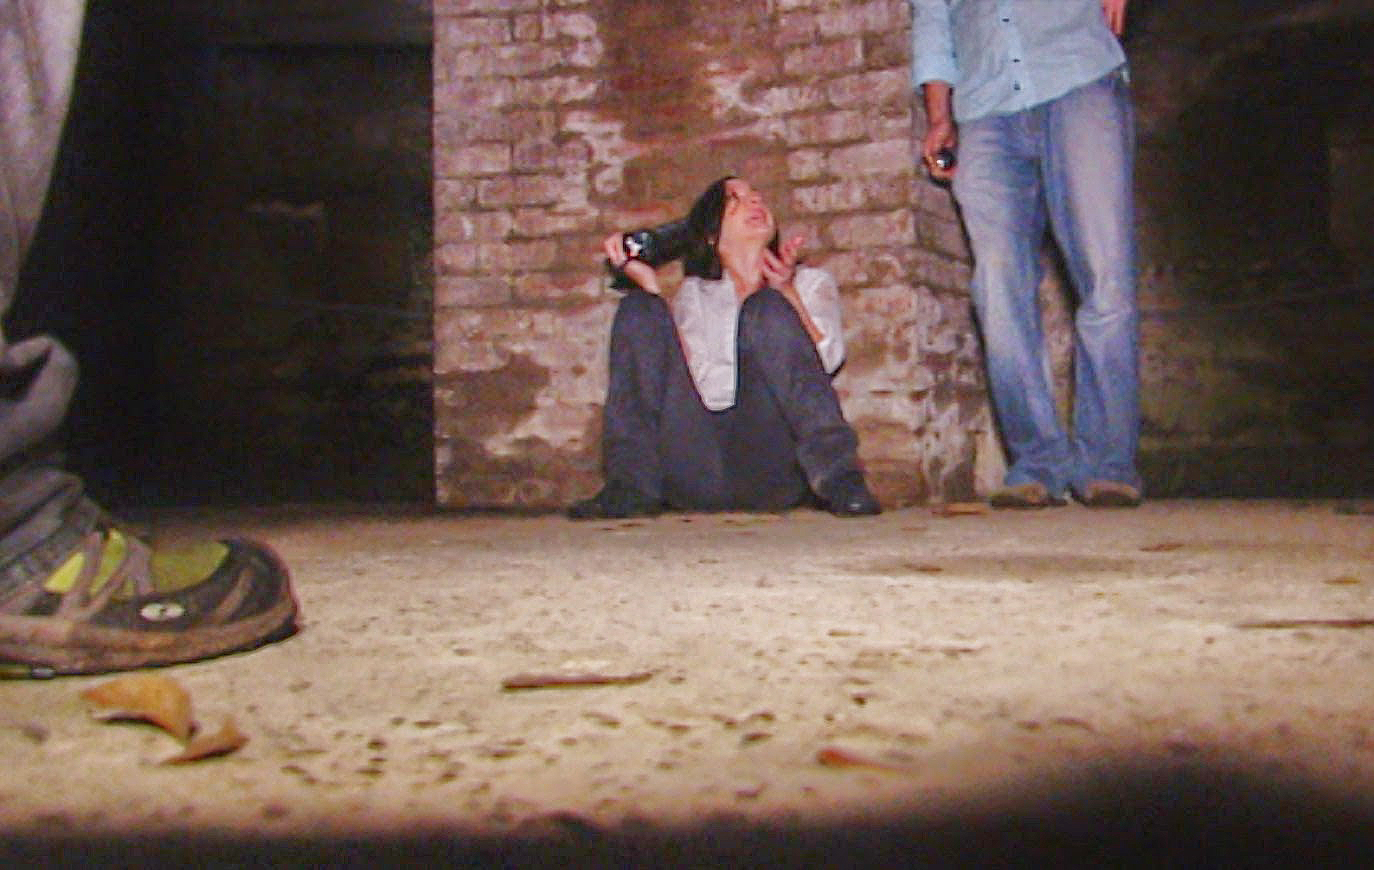 Investigating a government cover up, a news team explores the abandoned train tunnels of Sydney. The team soon finds they are not alone. Nothing creepier than running through abandoned subway tunnels in the dark. Unless you’re running through abandoned subways tunnels in the dark — and you’re not alone. The fast-paced suspense makes for a […]